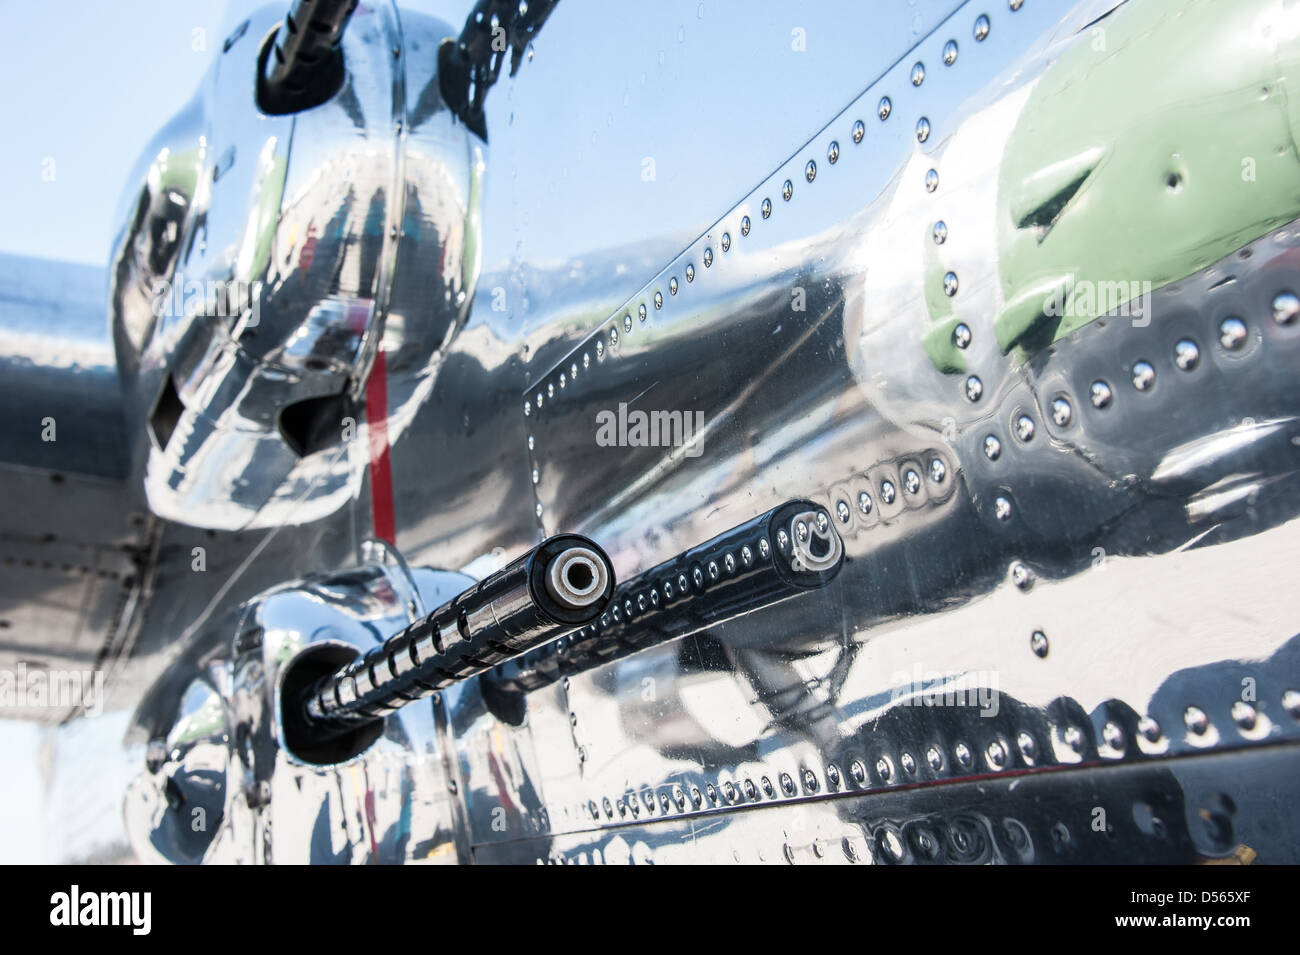 Mounted guns reflect in the polished chrome of a World War II era Mitchell B-25 Bomber at a Columbus, Georgia air show. Stock Photo